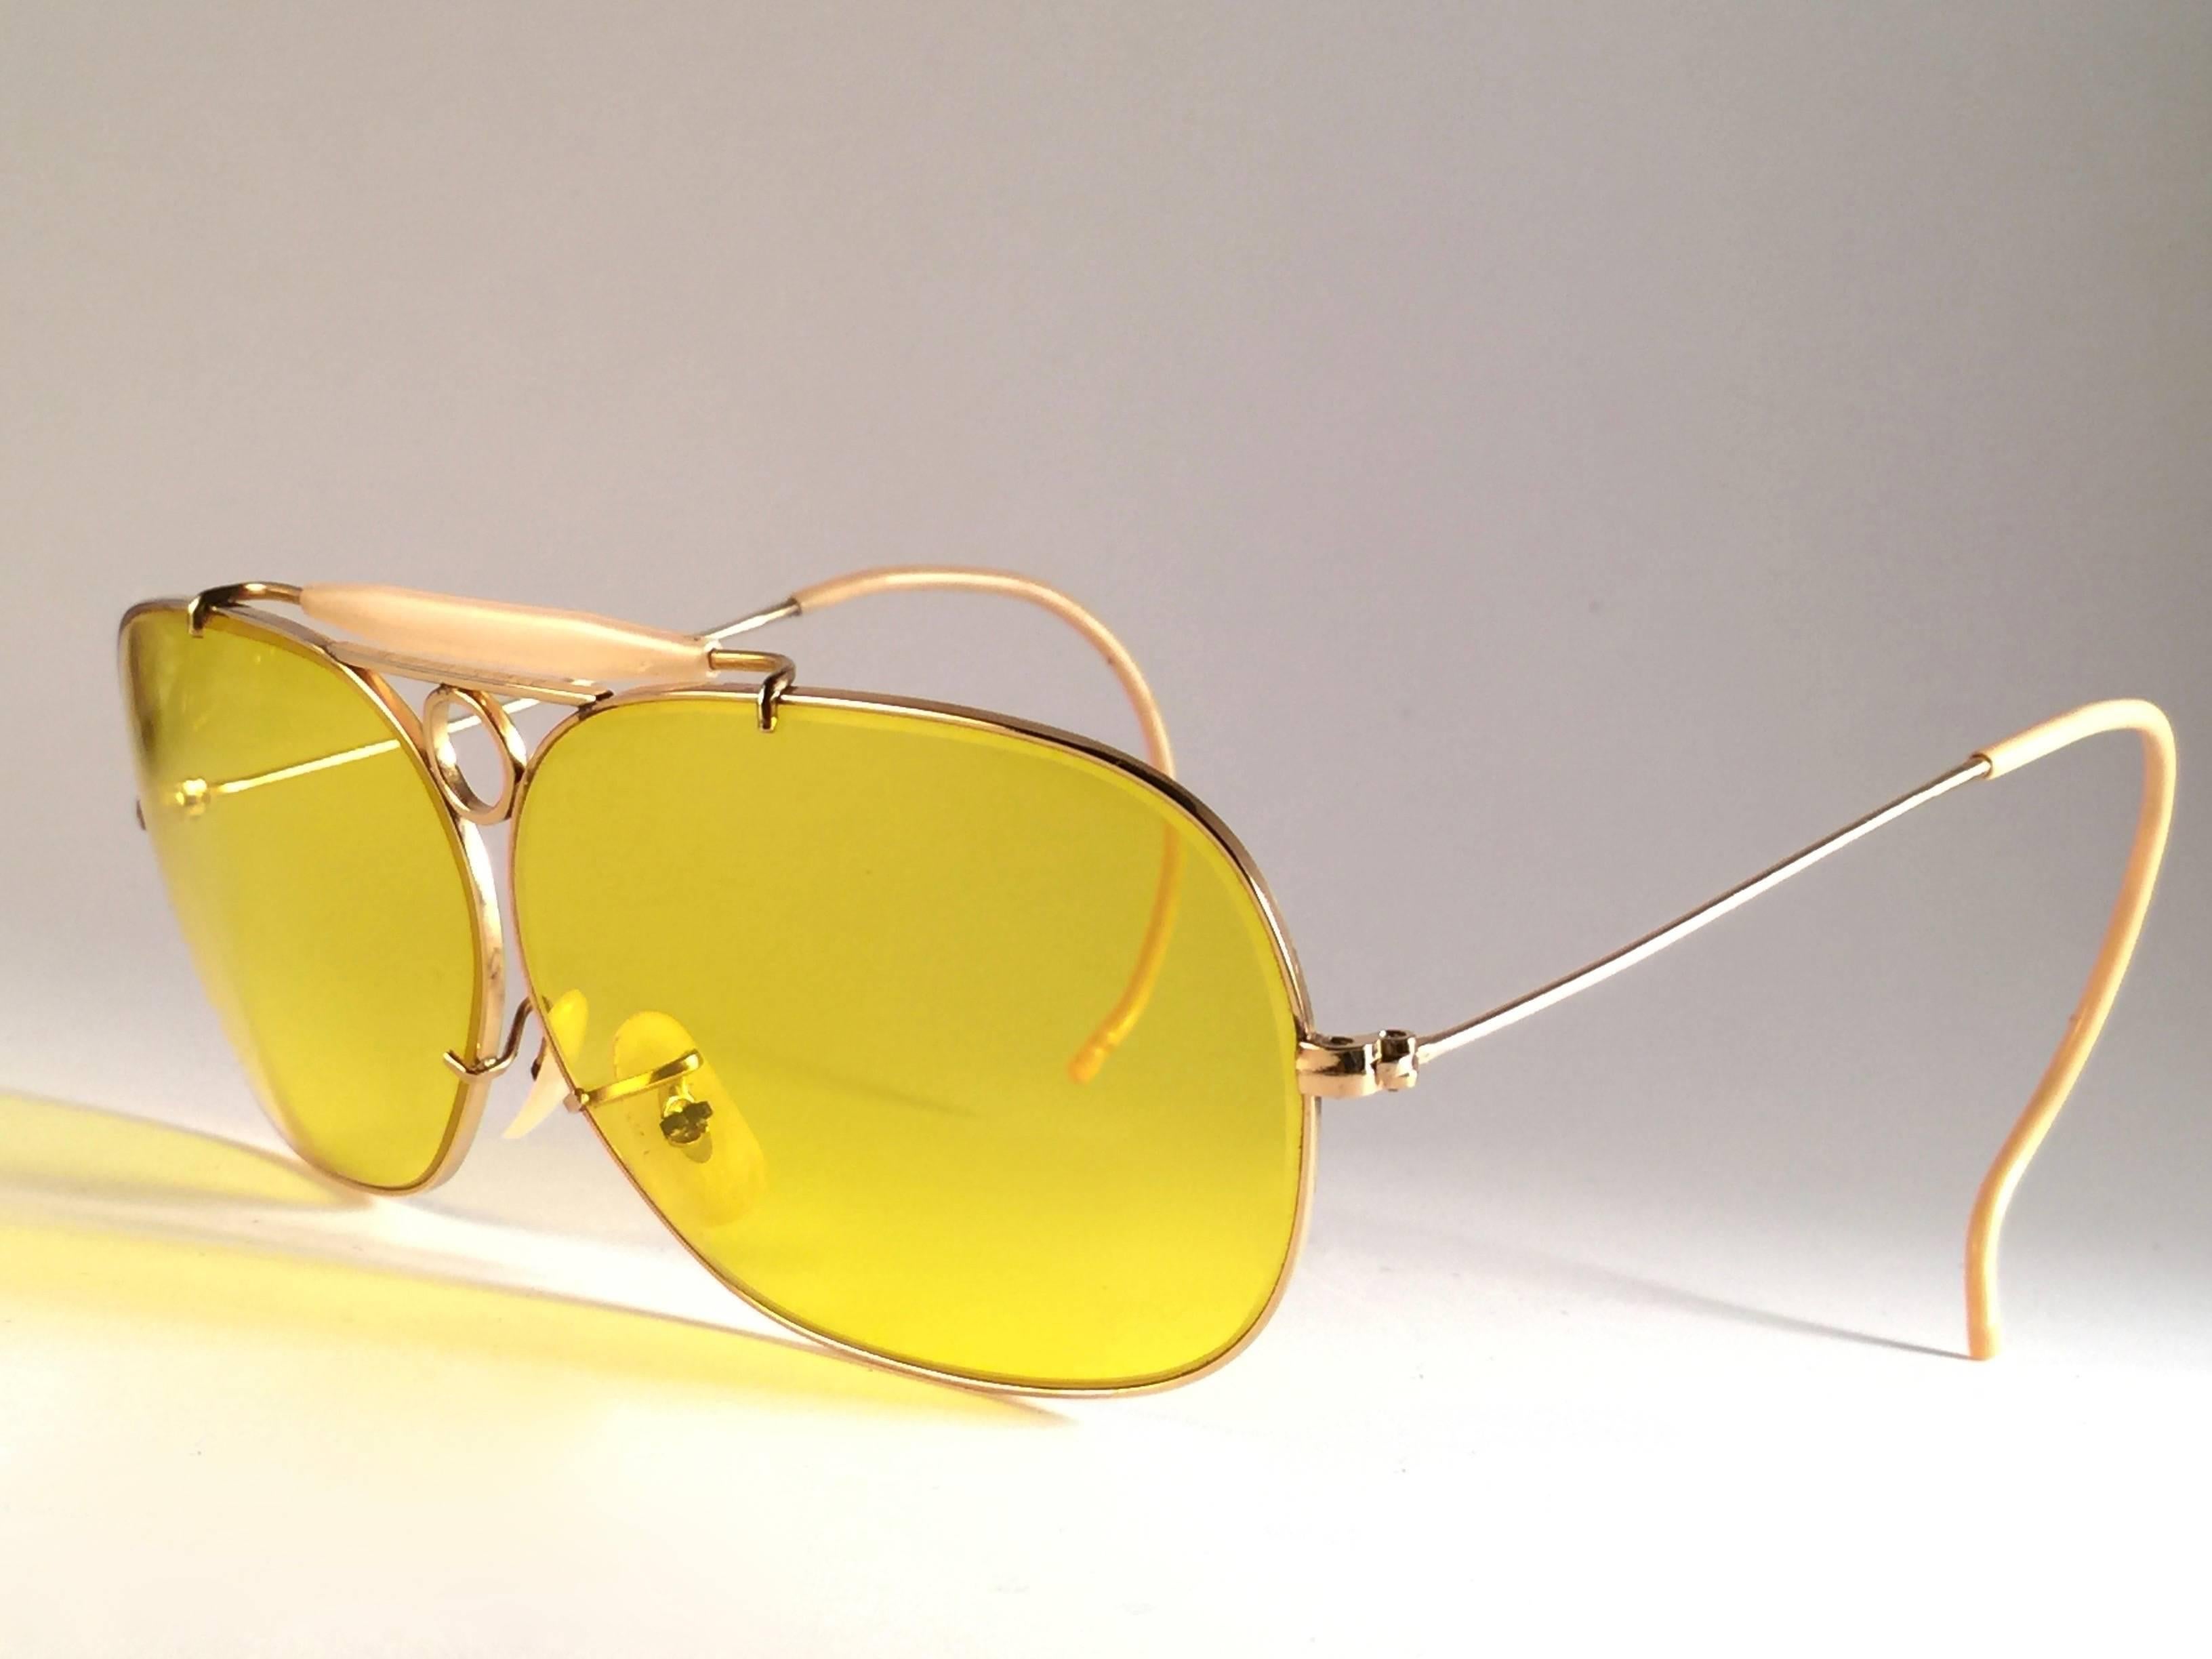 New Vintage Ray Ban Decot 10 K gold frame holding  pair of amber kalichrome lenses.

Made in USA.

Comes with its original Ray Ban B&L case.

Please notice this item is nearly 50 years old and may show sign of wear due to storage.